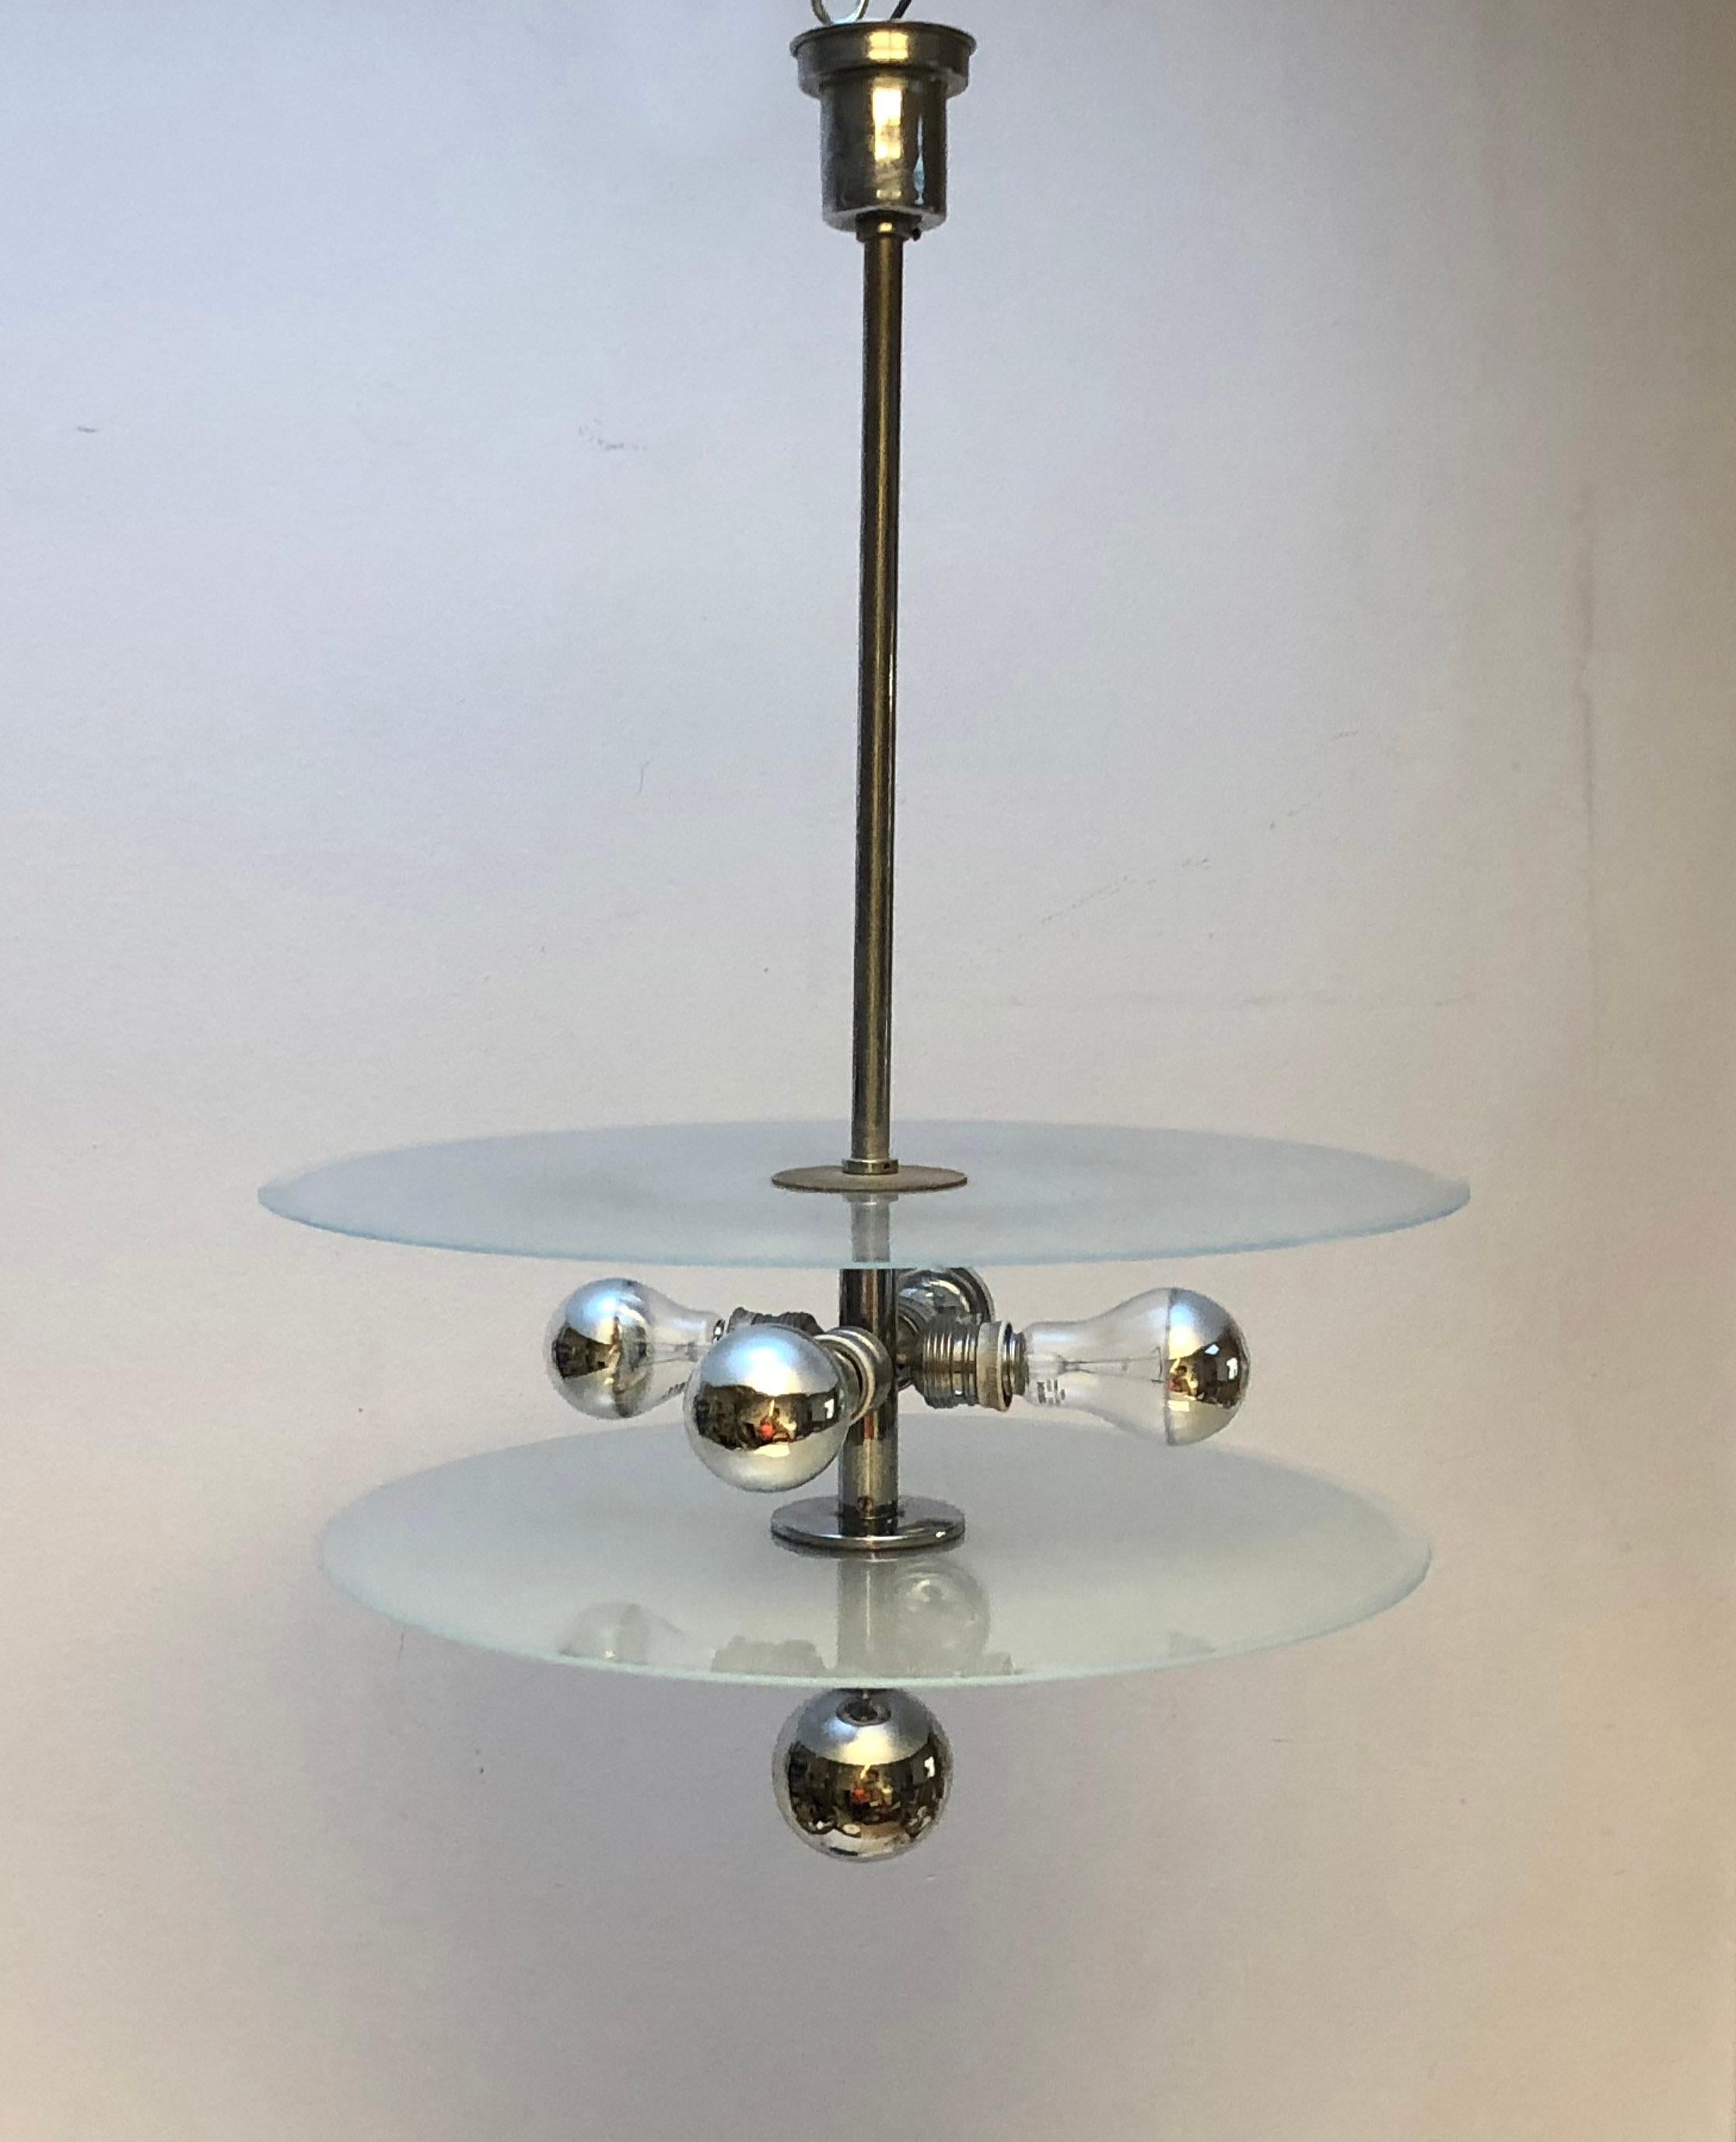 Bauhaus Chandelier by Schwintzer & Graeff from the 1930s For Sale 2